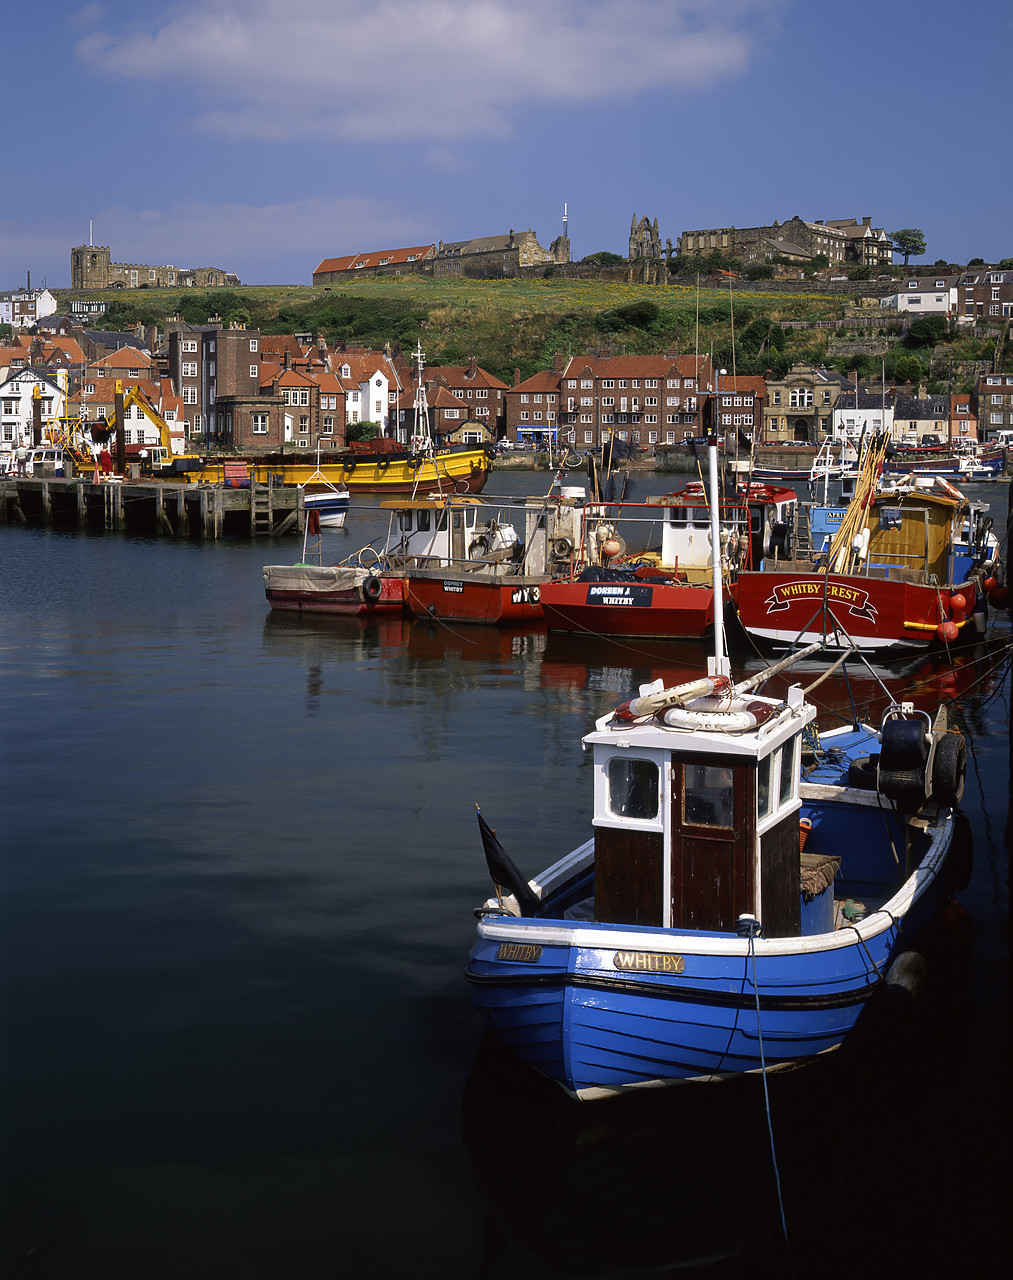 #980988-5 - Whitby Harbour, North Yorkshire, England